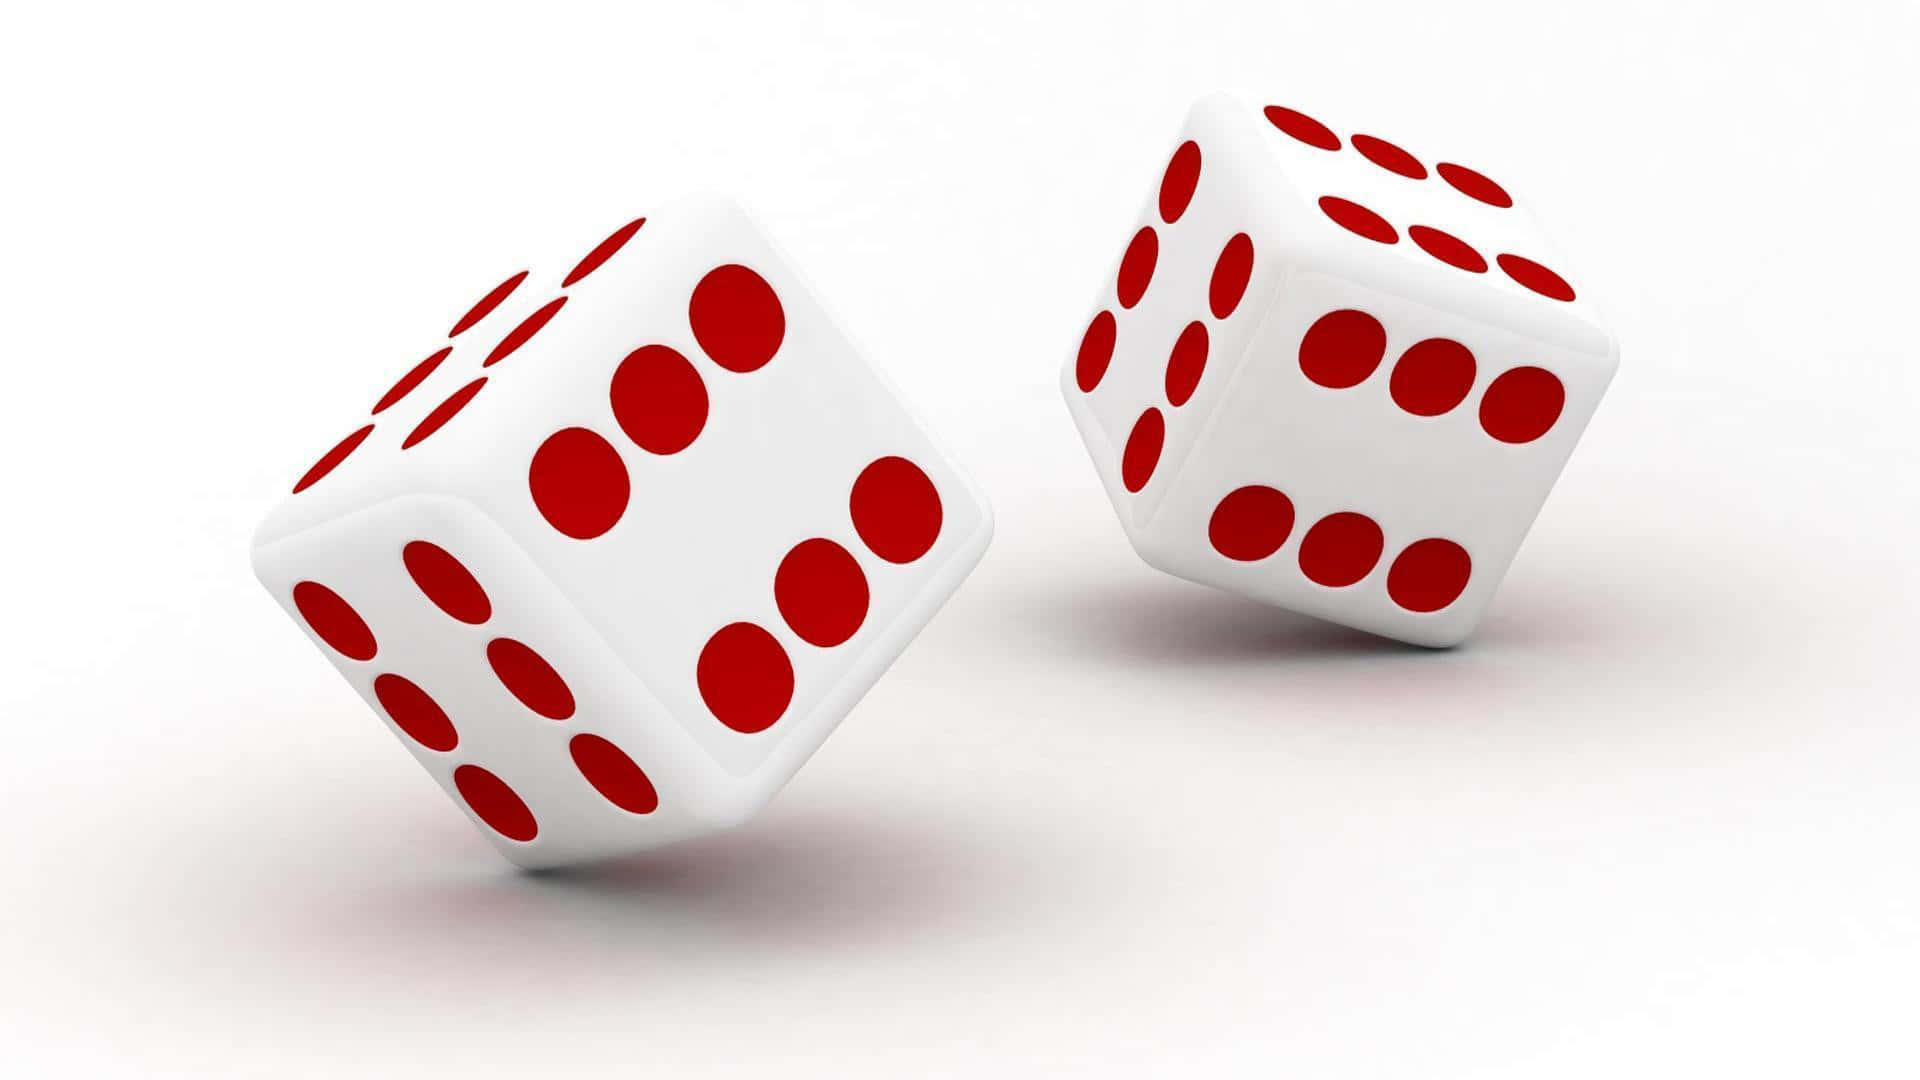 Two Red Dice Tossed White Background